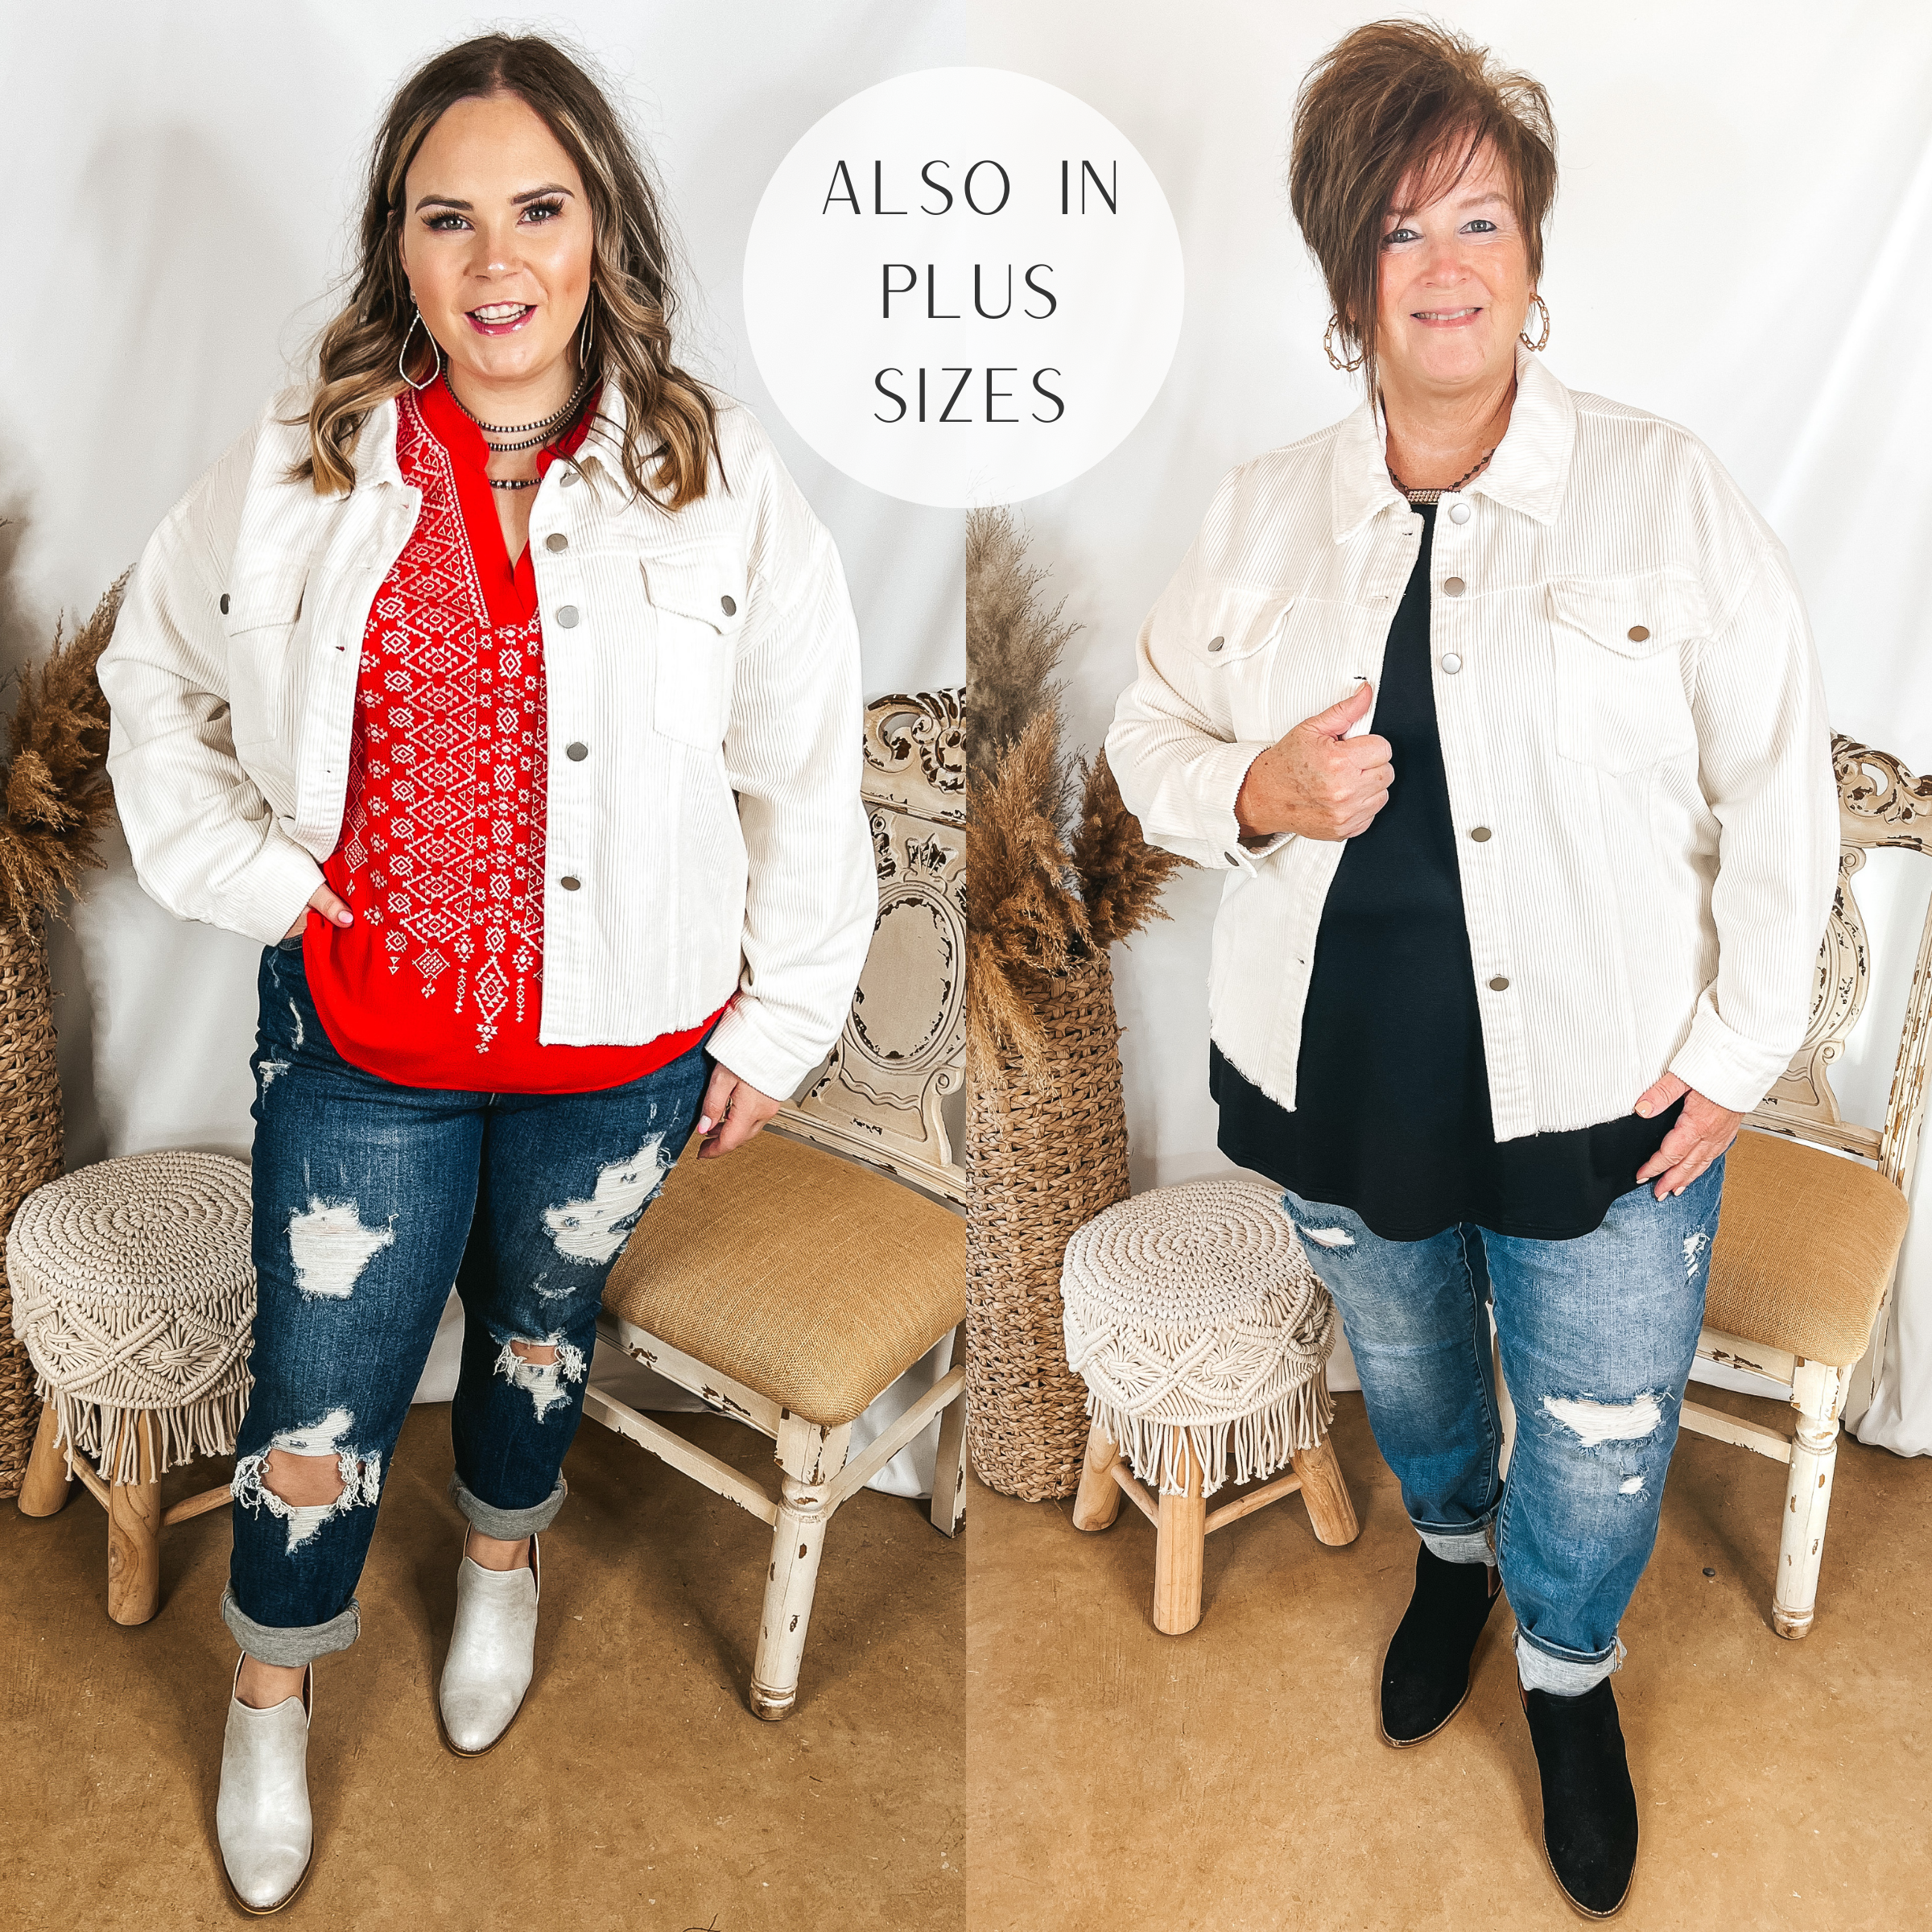 Models are wearing a white corduroy button up jacket. Size large model has it paired with a red top, dark wash distressed jeans, and silver jewelry. Plus size model has it paired with medium wash distressed jeans, a black top, black booties, and gold jewelry.